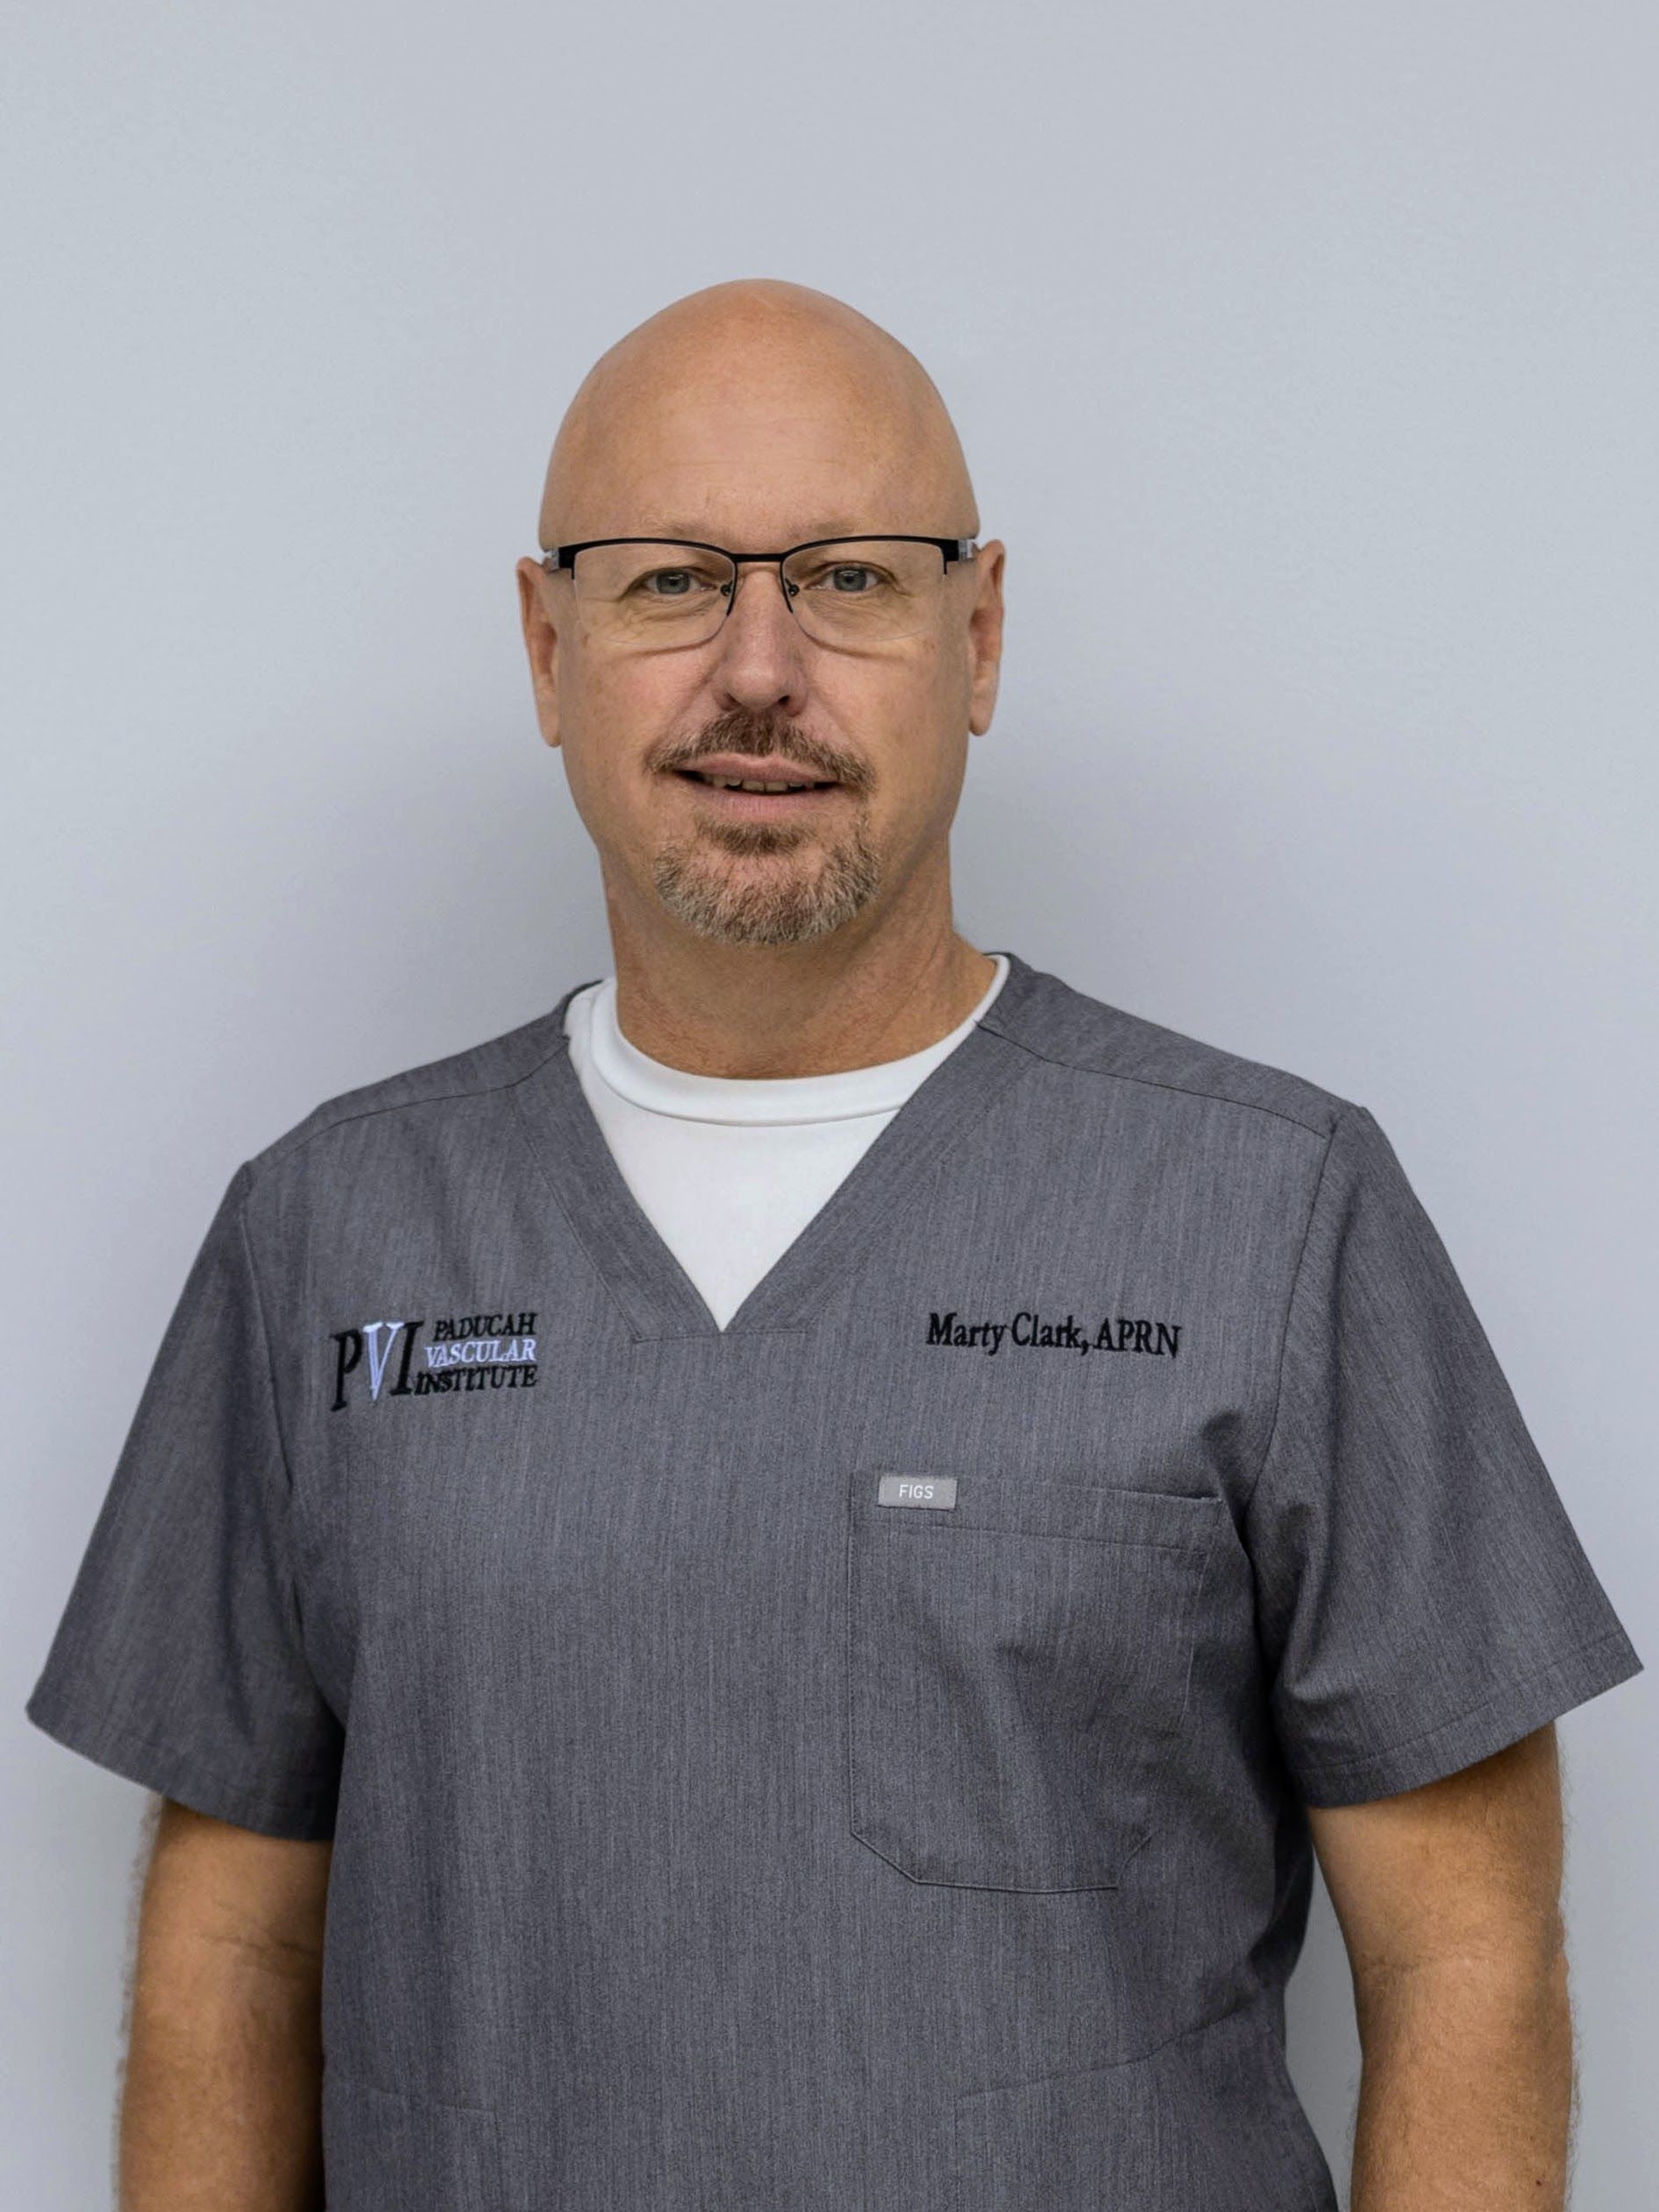 Marty Clark, Advanced Registered Nurse Practitioner, a man wearing a scrub top with paducah vascular institute logo on it